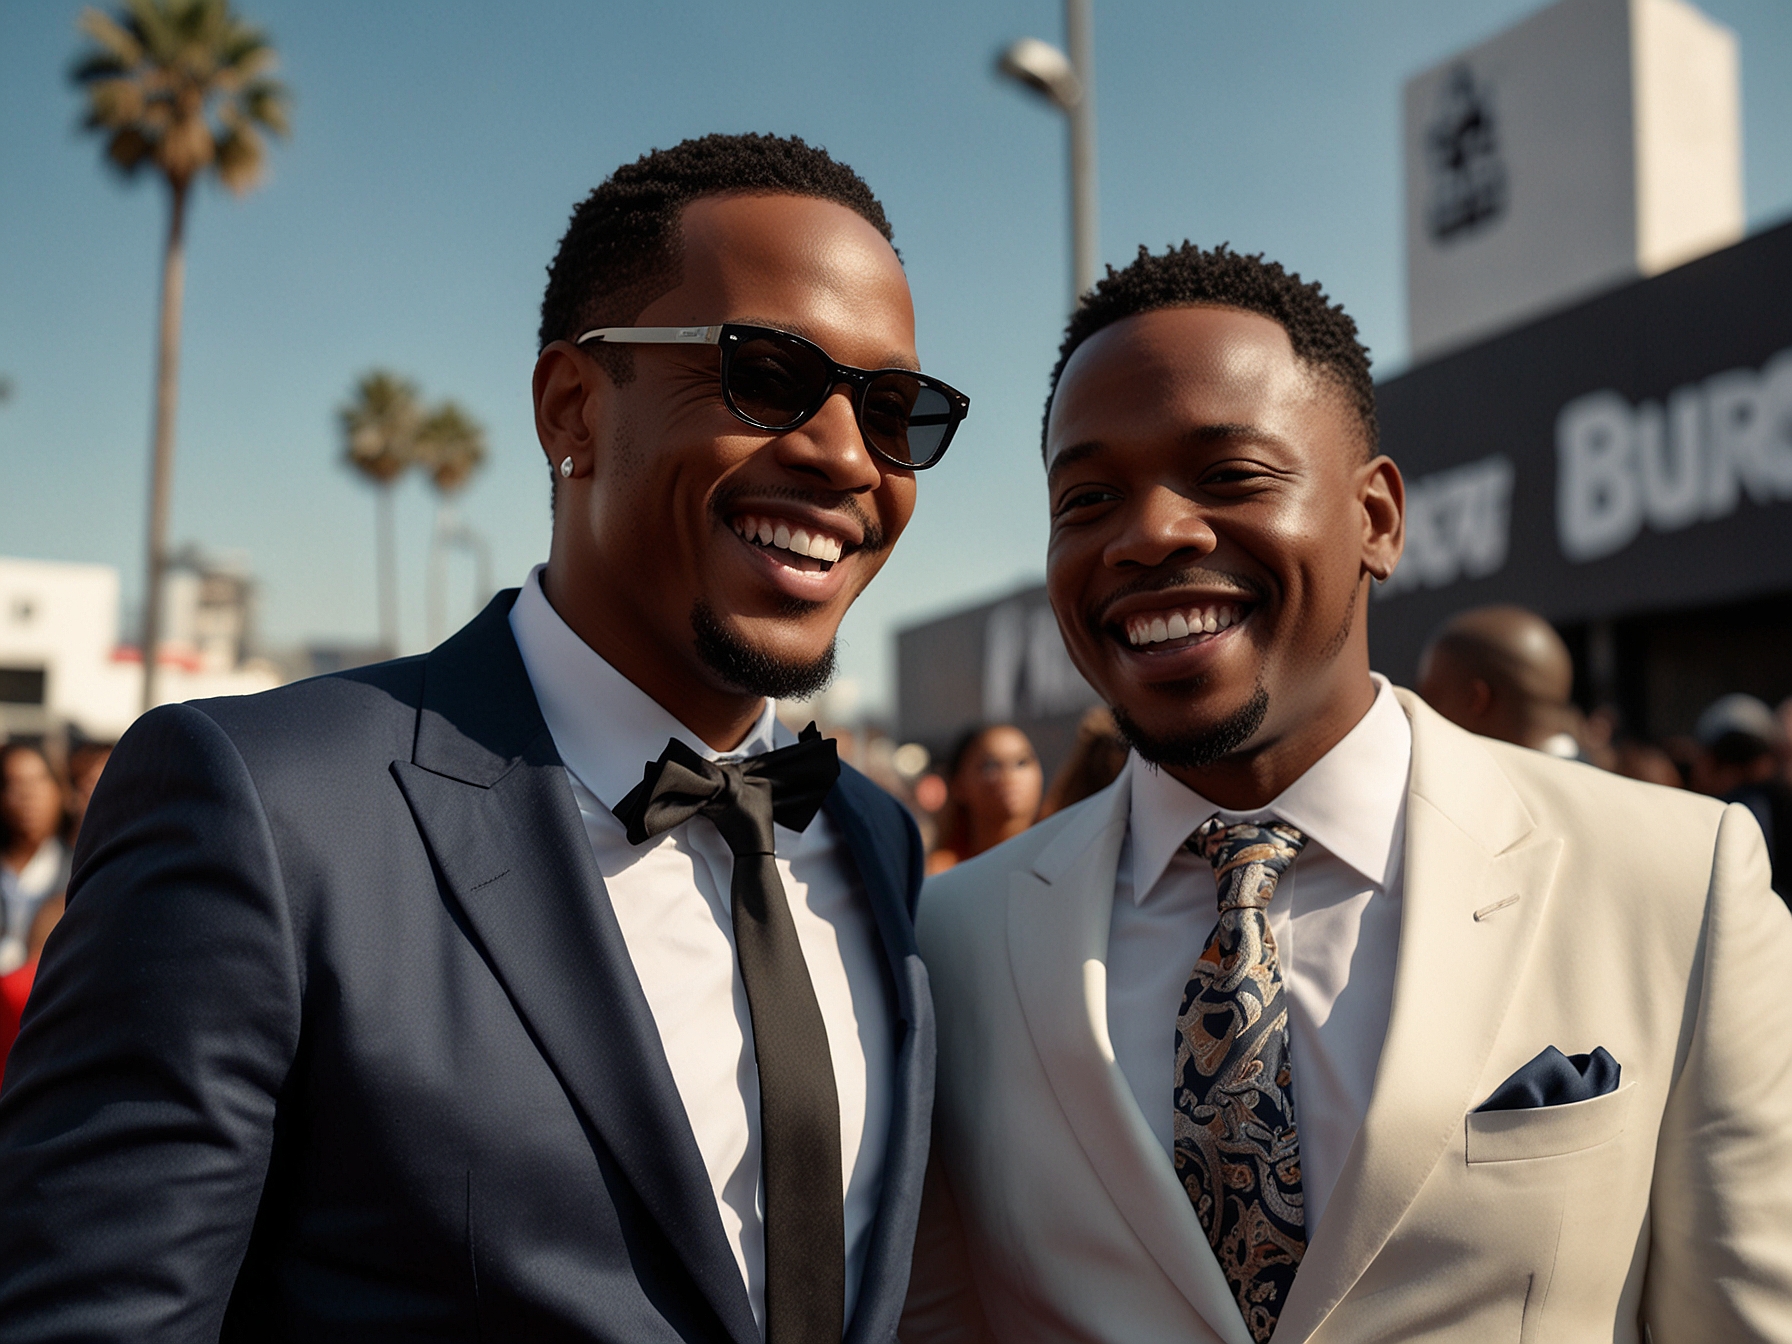 BossMan Dlow and Carl Lamarre share a light-hearted moment during their interview on the red carpet at the BET Awards 2024, with Dlow dressed in a sleek, tailored outfit.